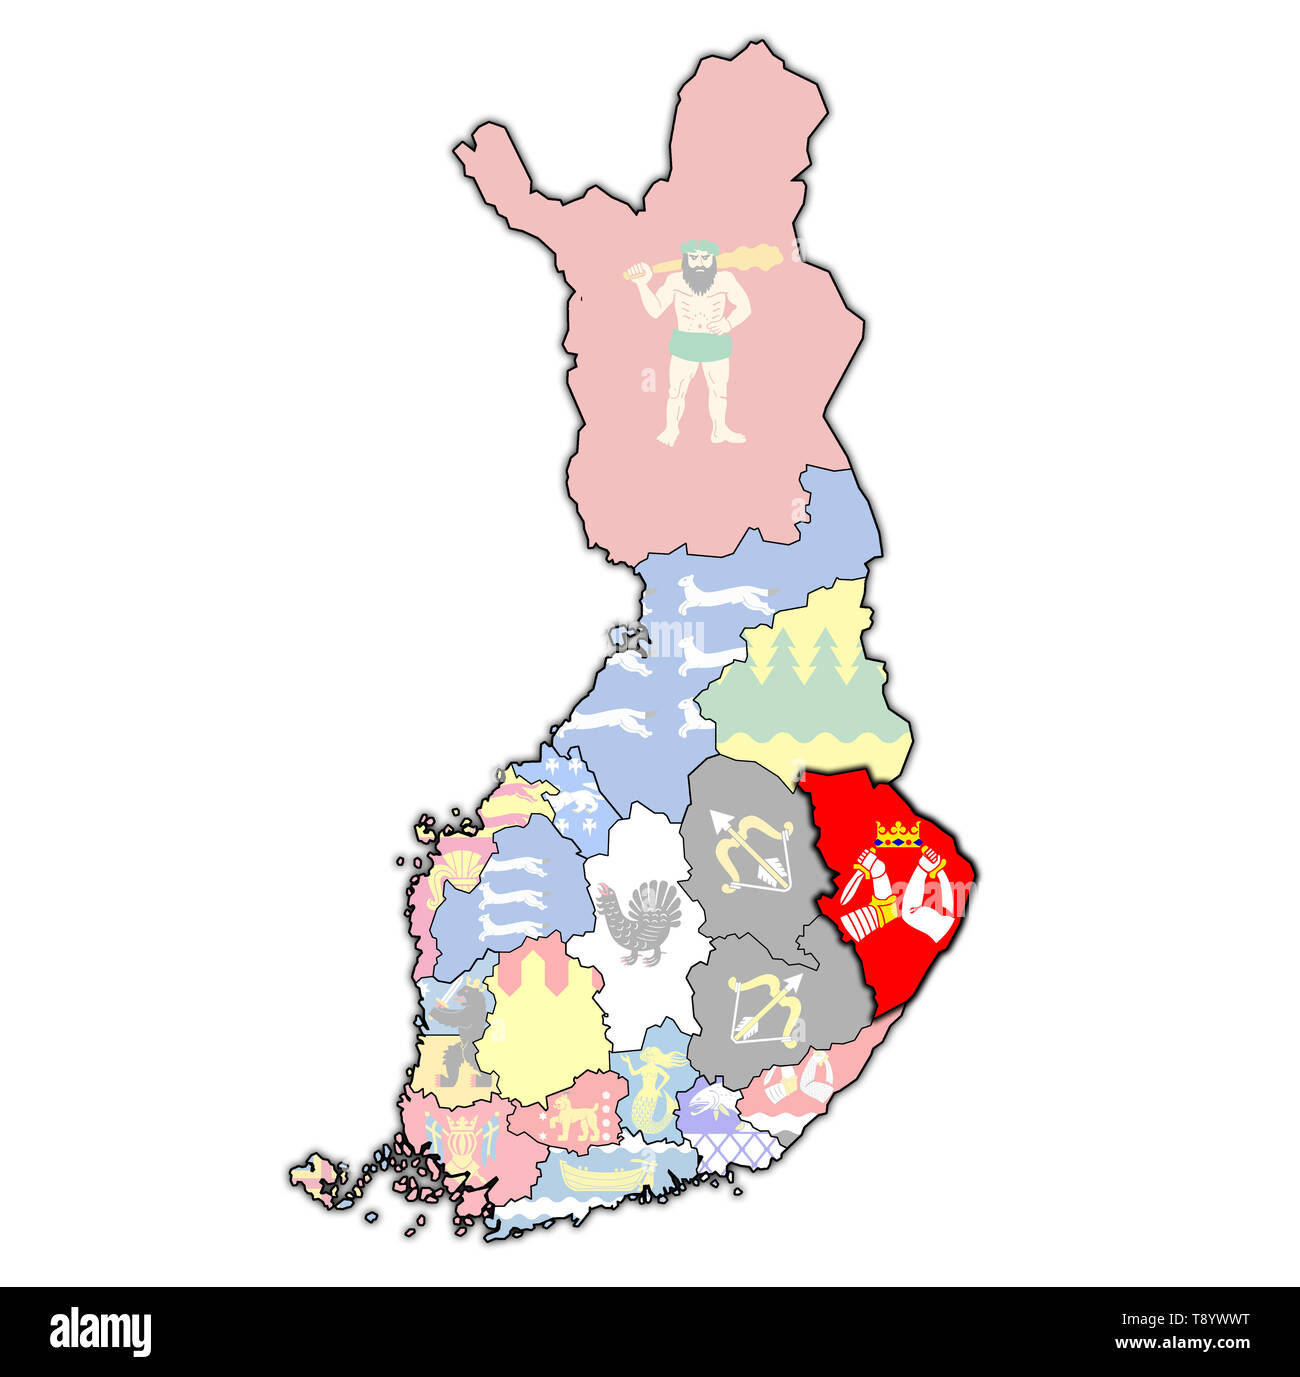 territory of North Karelia region on map of administrative divisions of Finland with clipping path Stock Photo